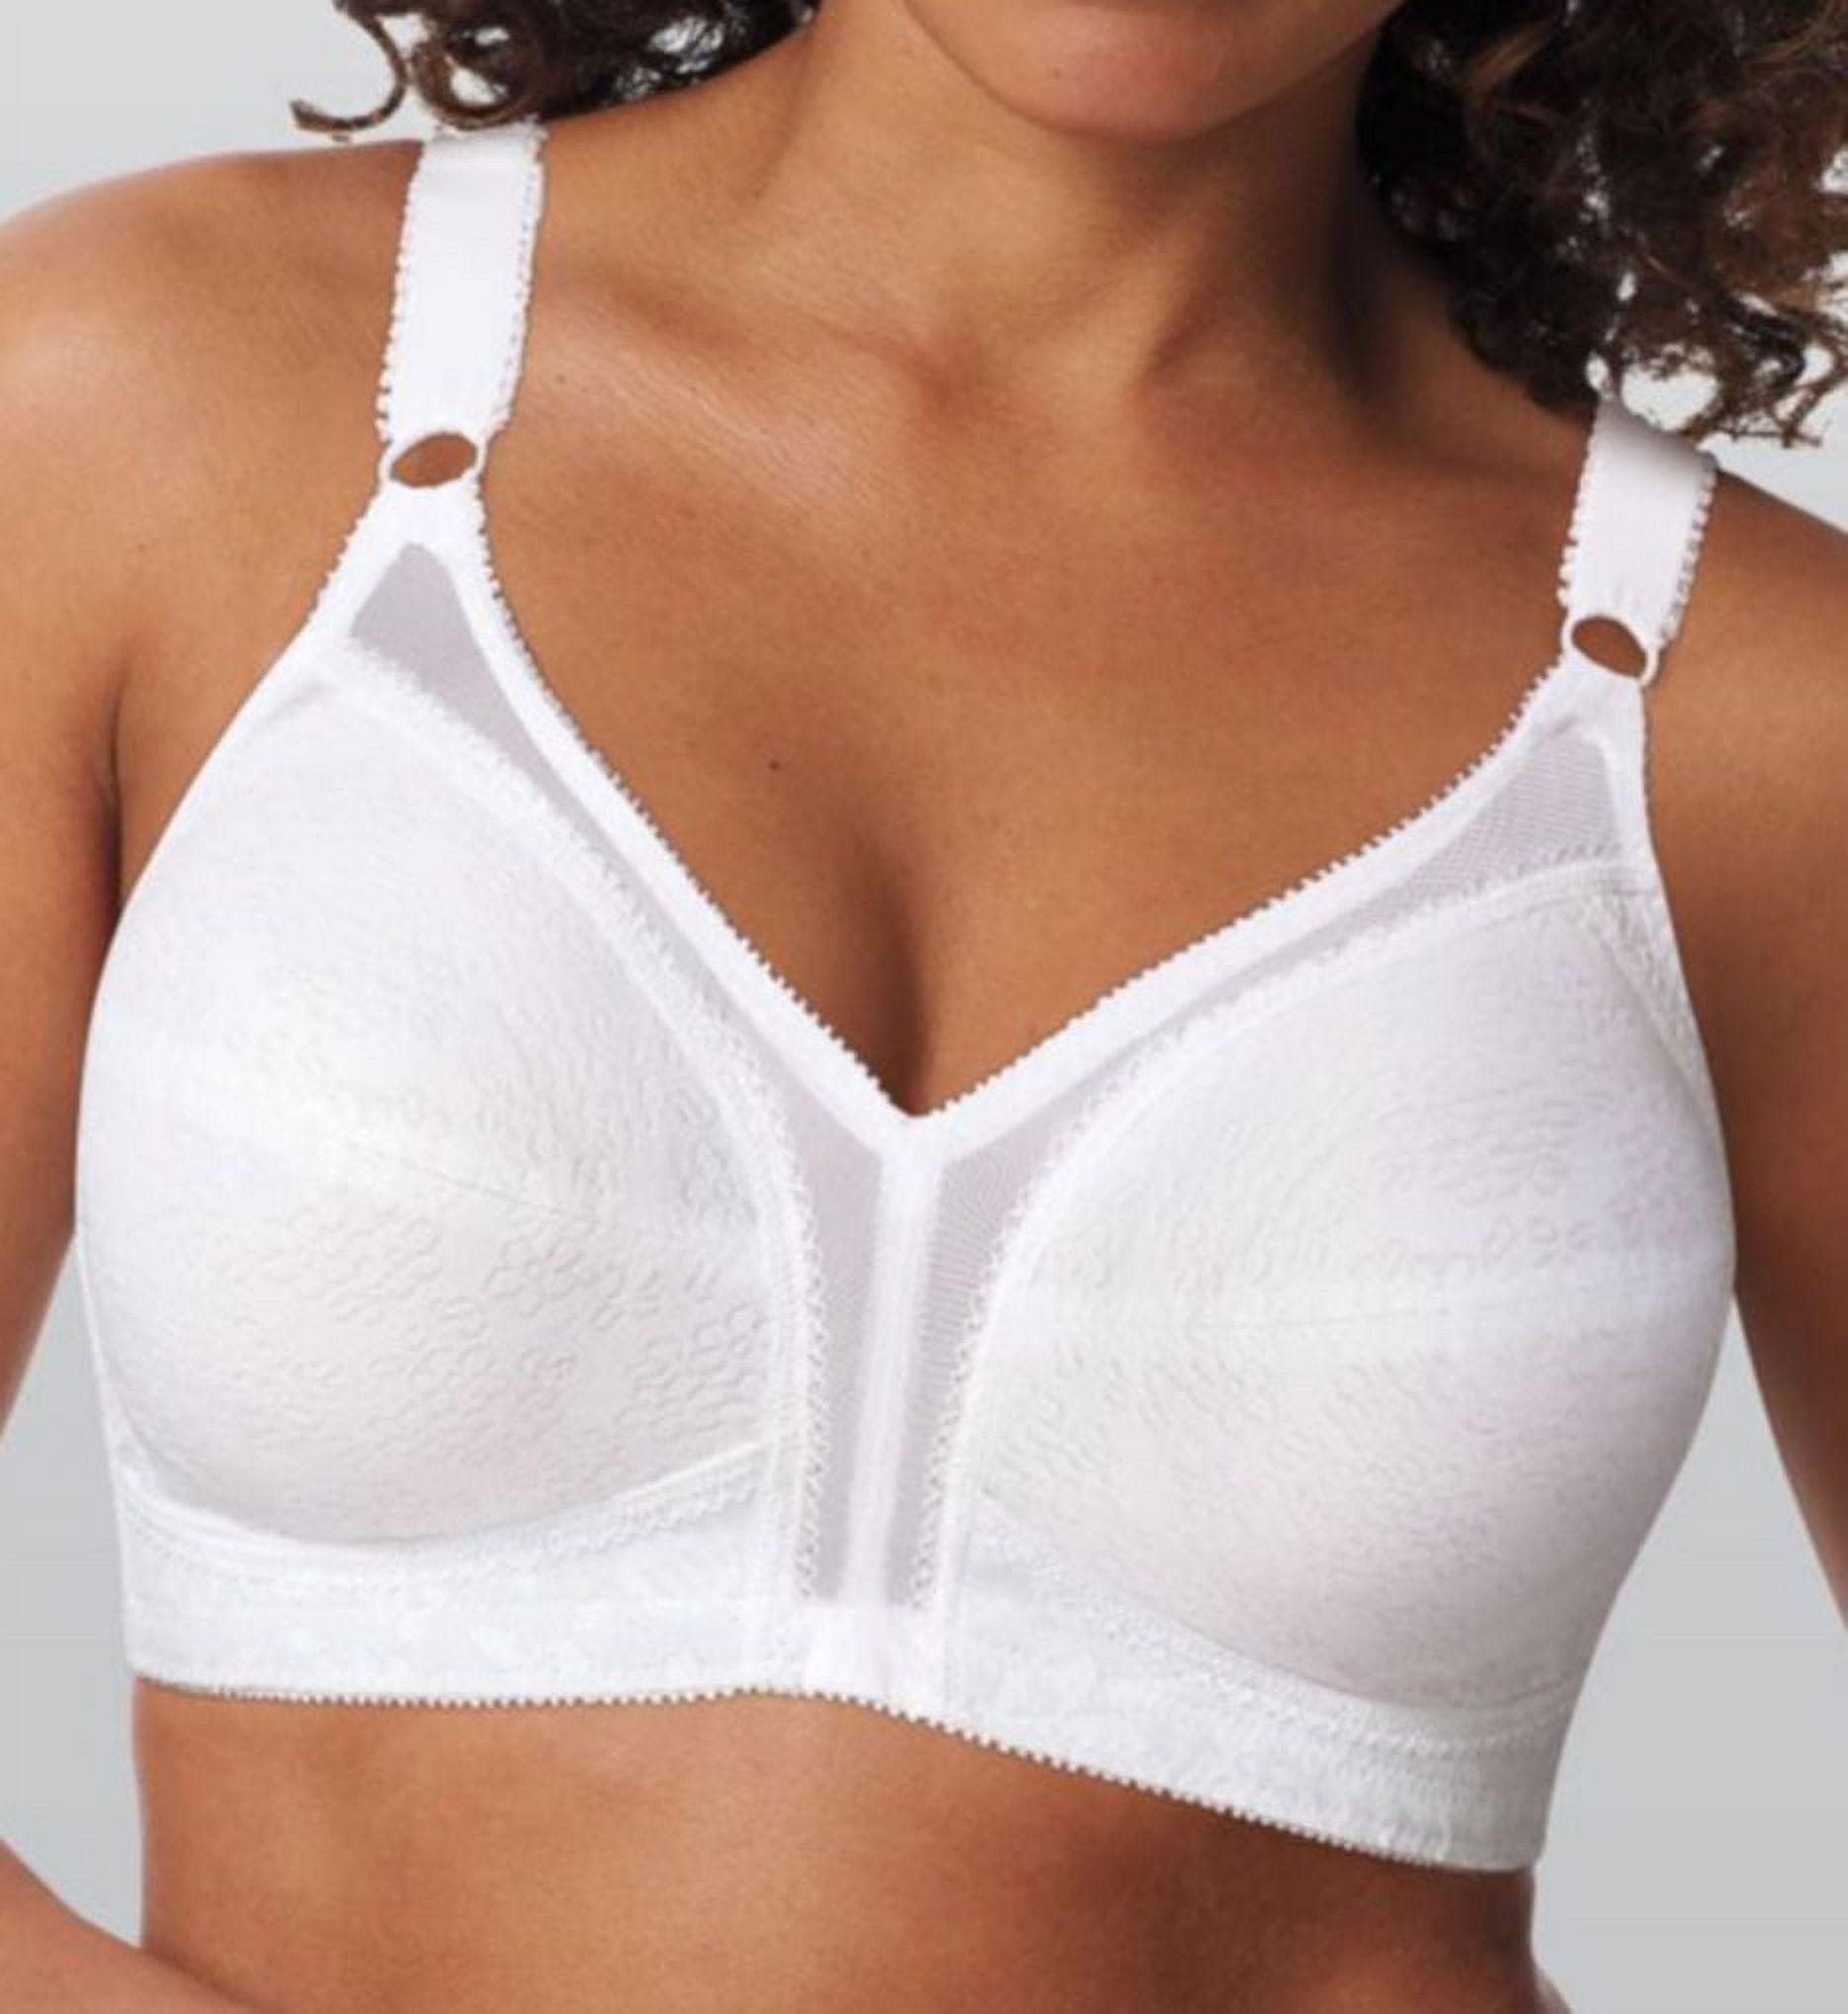 Playtex 18 Hour Undercover Slimming Wirefree Bra, Style 4912